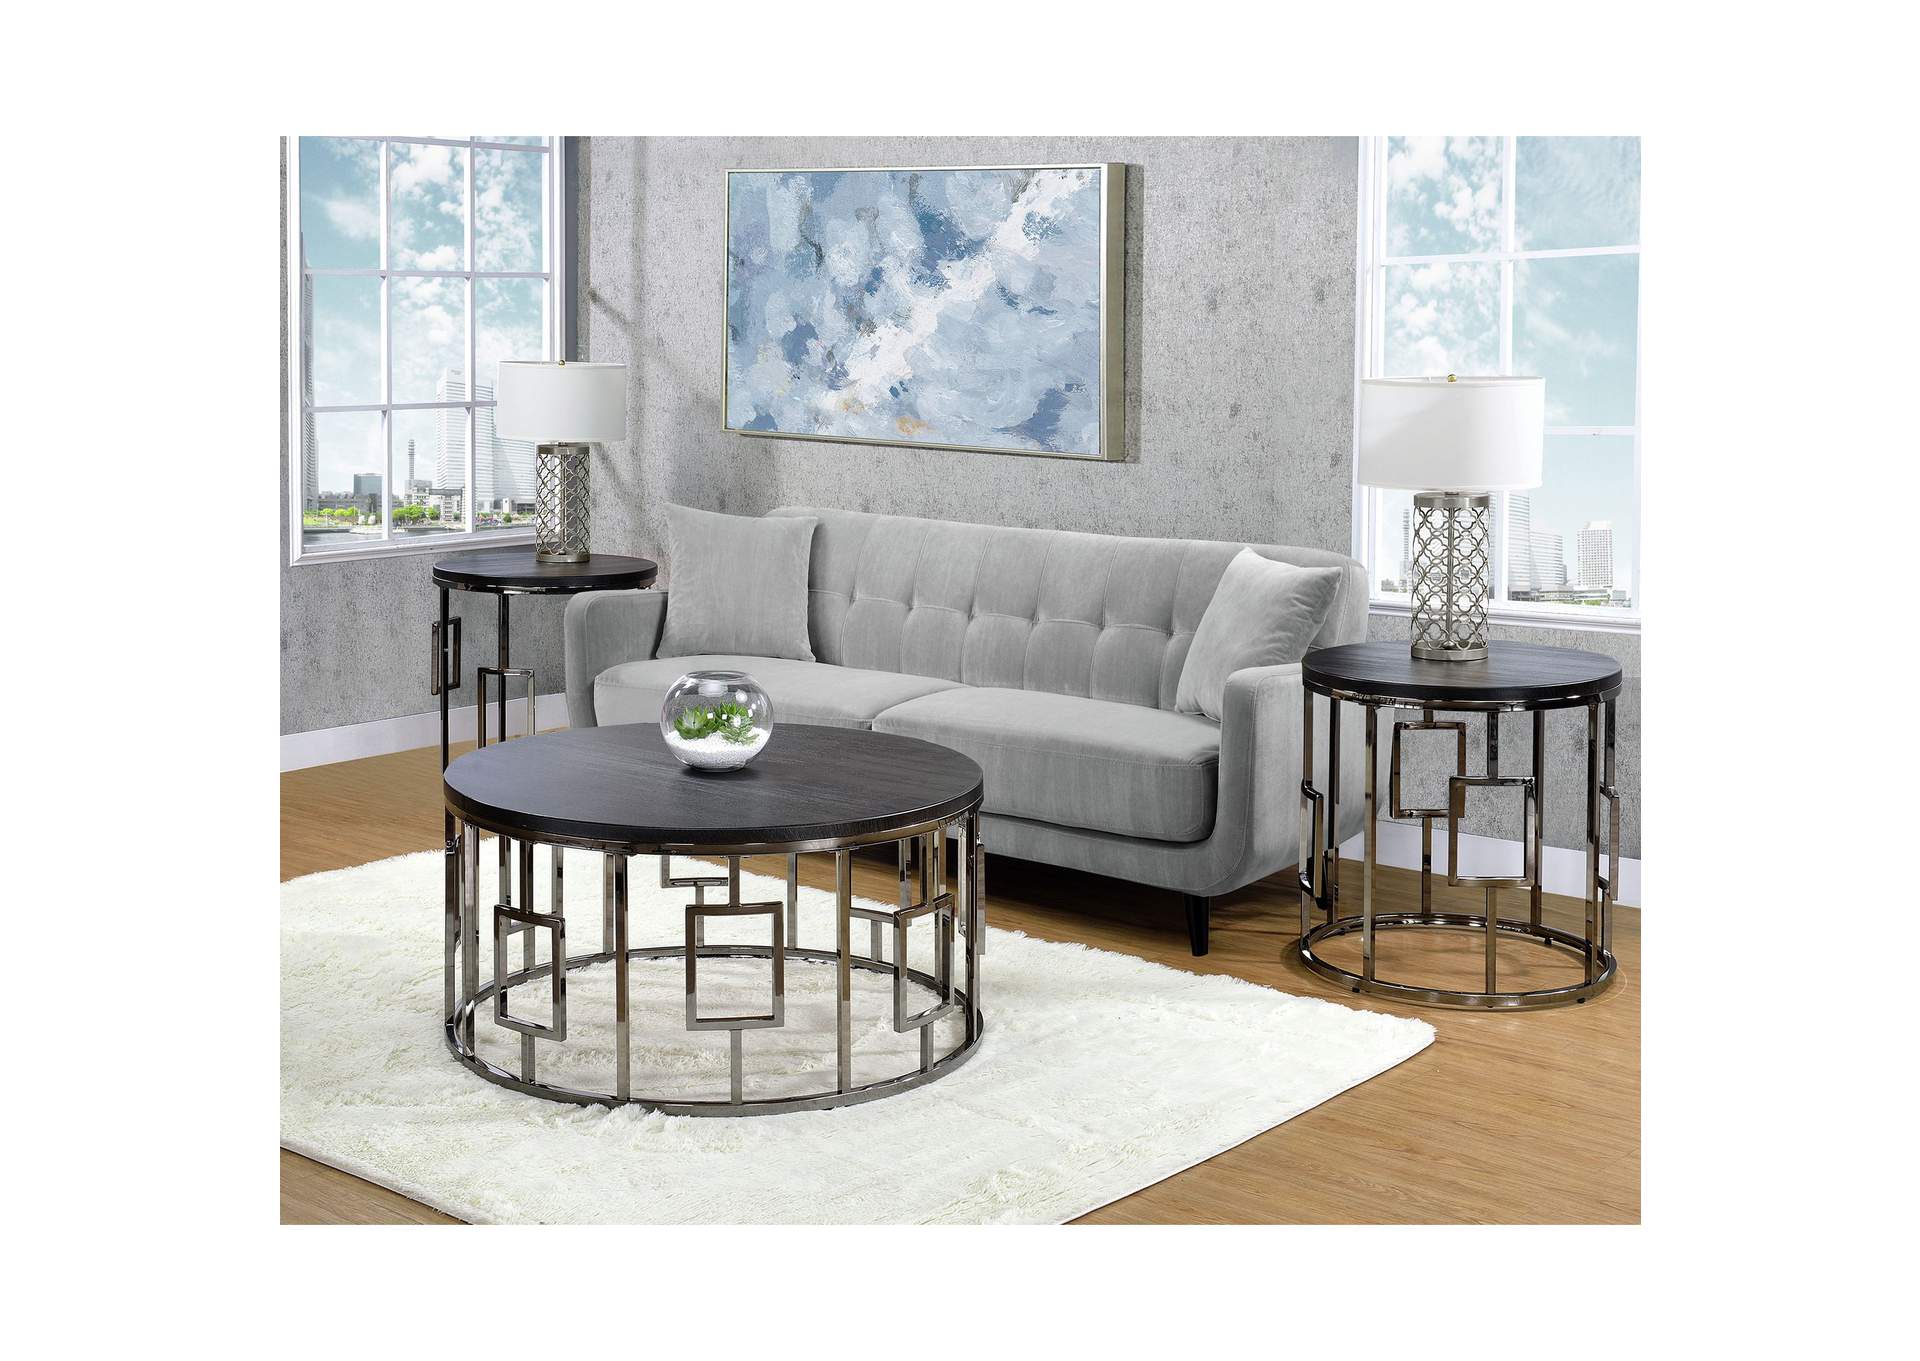 Ester C - 113C - 1114 End Table Upgraded 3A,Elements